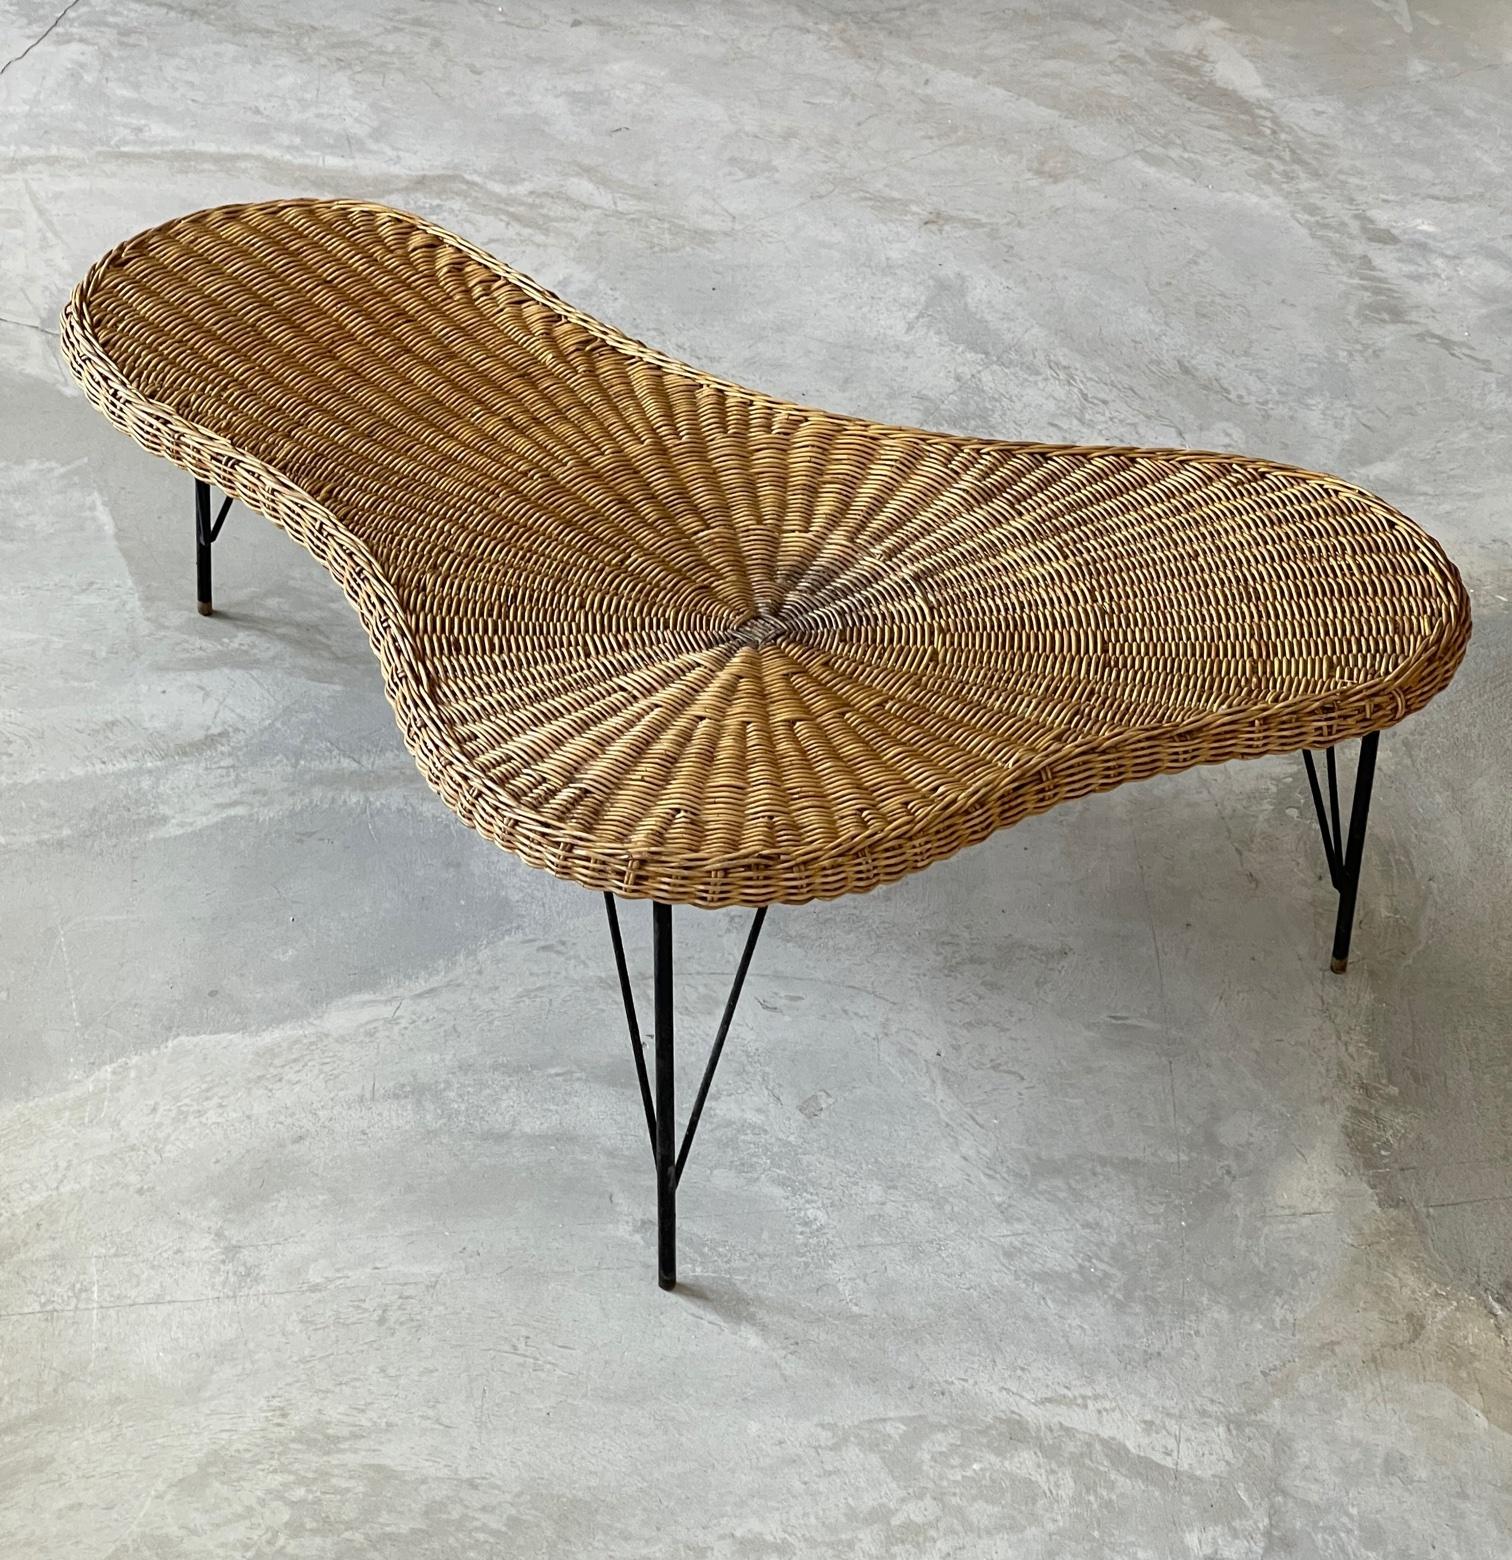 An organic / biomorphic / free form coffee / cocktail table. In woven rattan, original black-lacquered metal legs, with brass caps.

Other designers of the period include Paul Frankl, T.H. Robsjohn-Gibbings, Jean Royere, Vladimir Kagan, and George